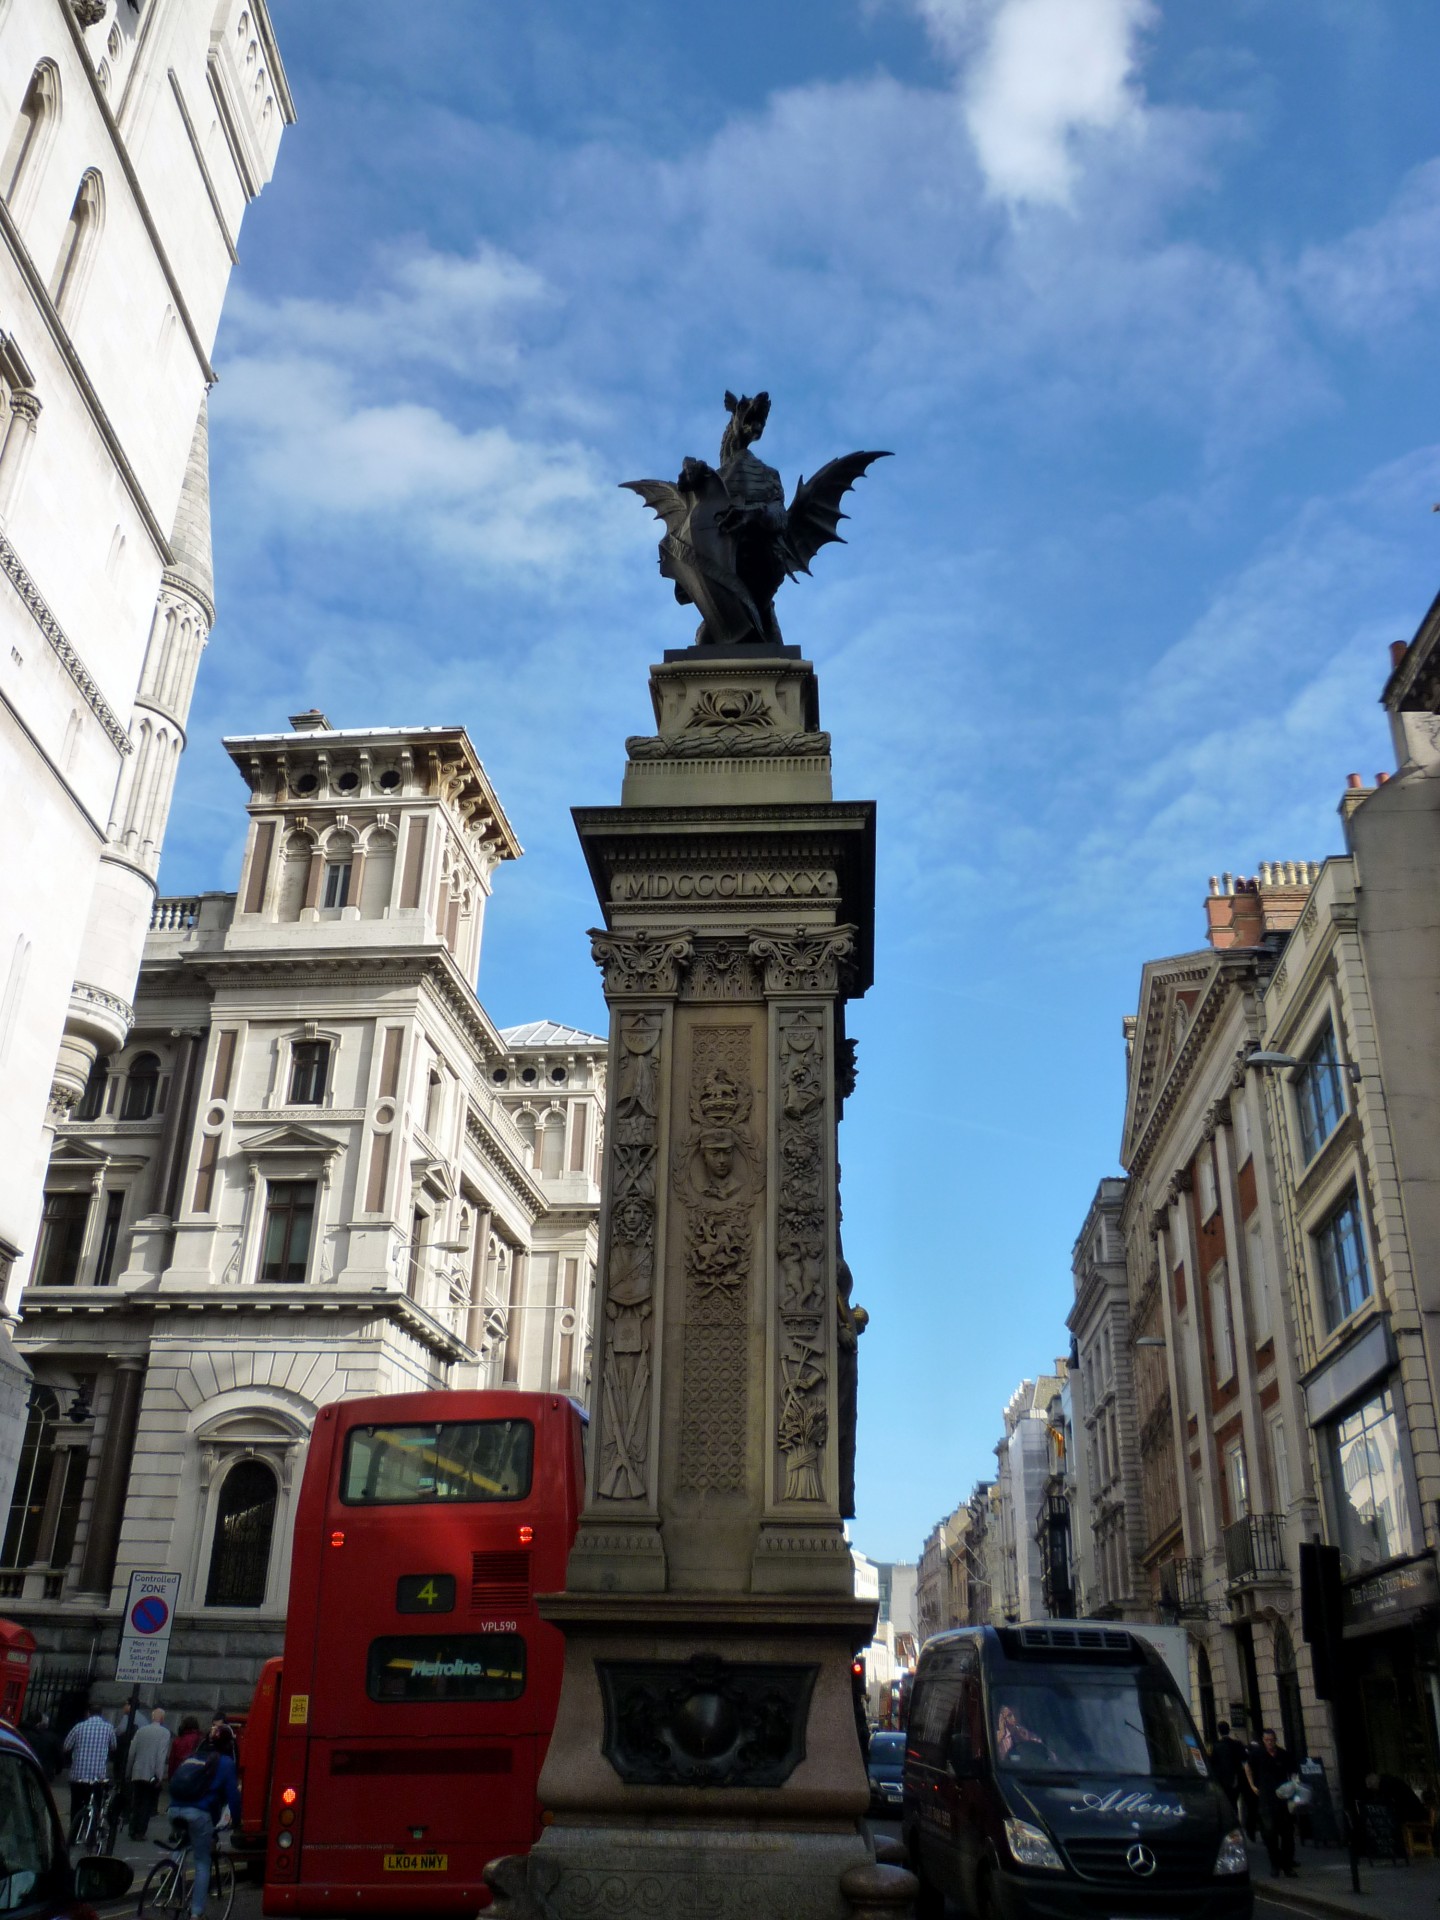 Column in the middle of Fleet Street looking towards St. Paul's Cathedral